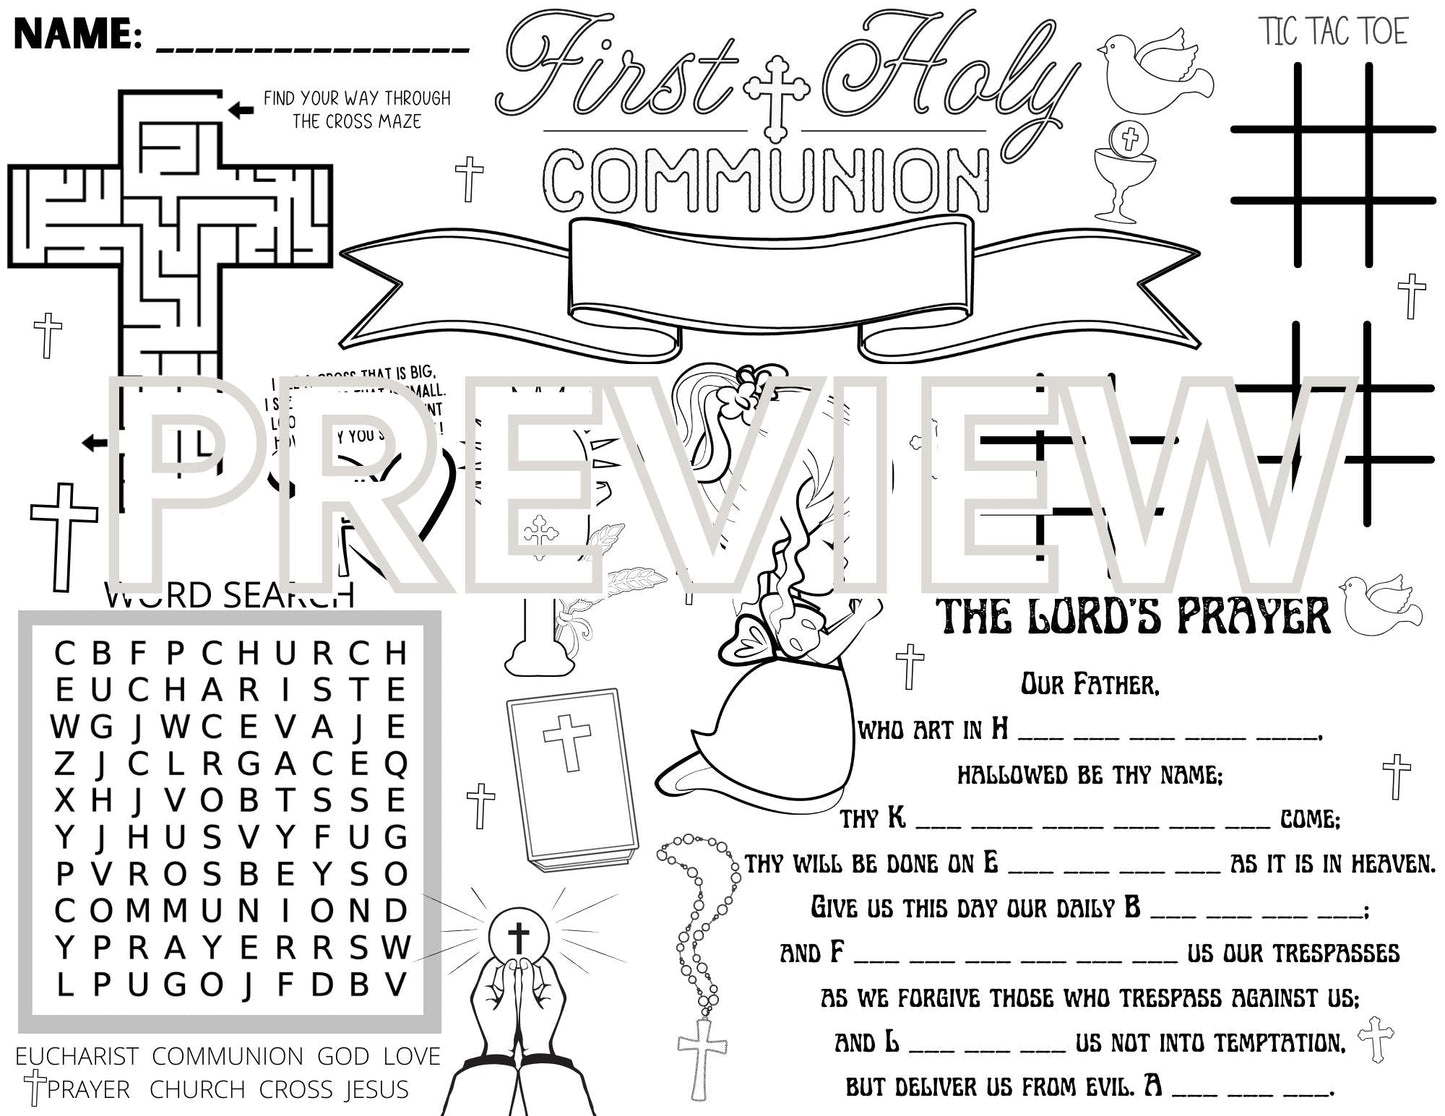 First Holy Communion Coloring Placemat - Fun Activities for All Ages - 2-Sided Design Includes Word Search, Tic-Tac-Toe, and More! - Twinklette